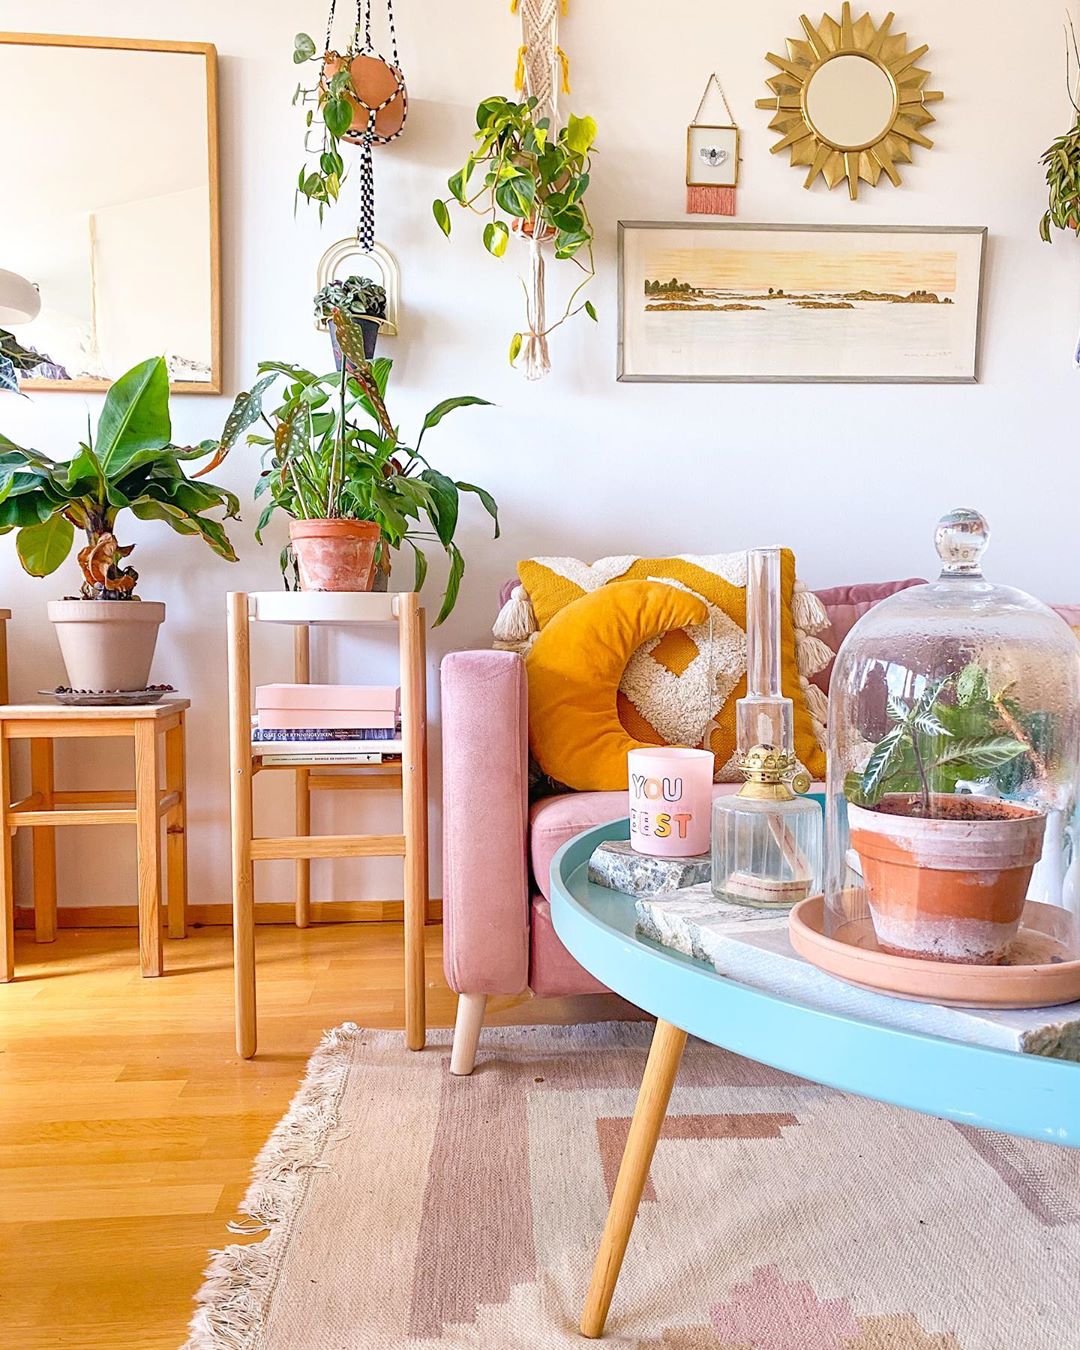 10 Ideas For Home Decorating On A Budget